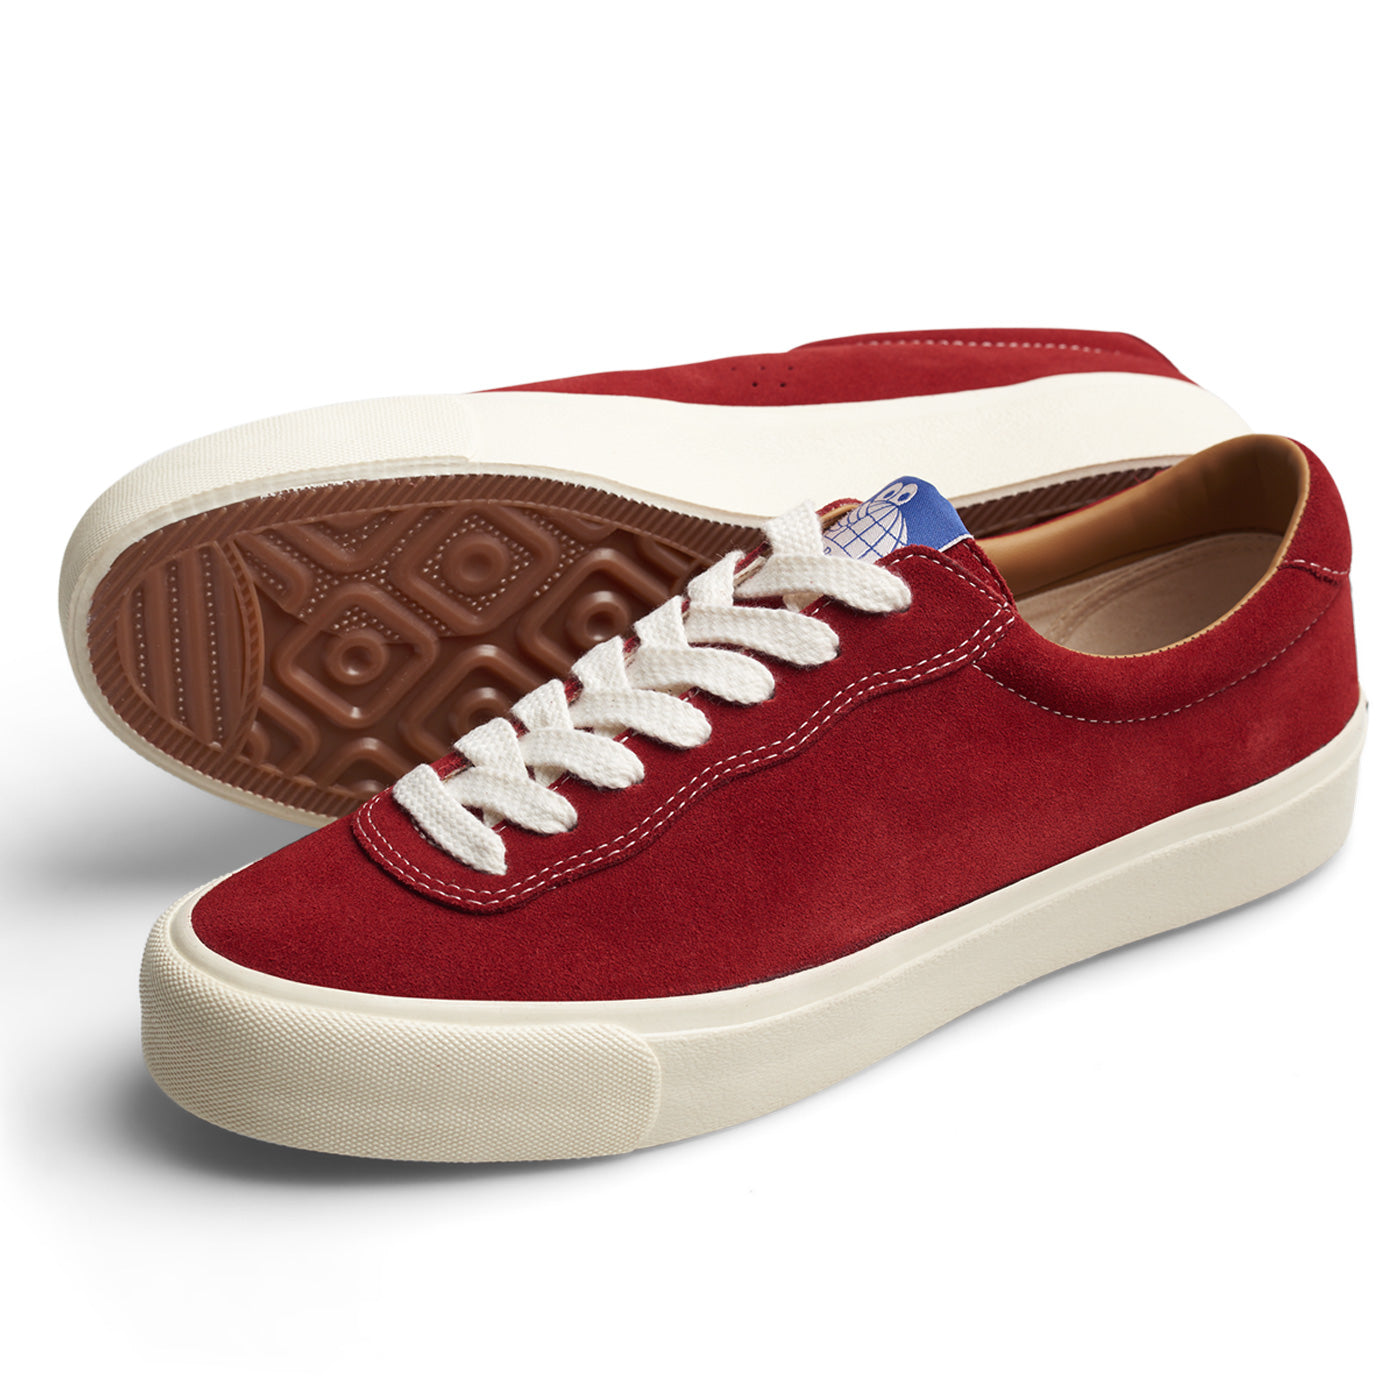 Last Resort AB VM001 Suede LO Shoes - Old Red/White